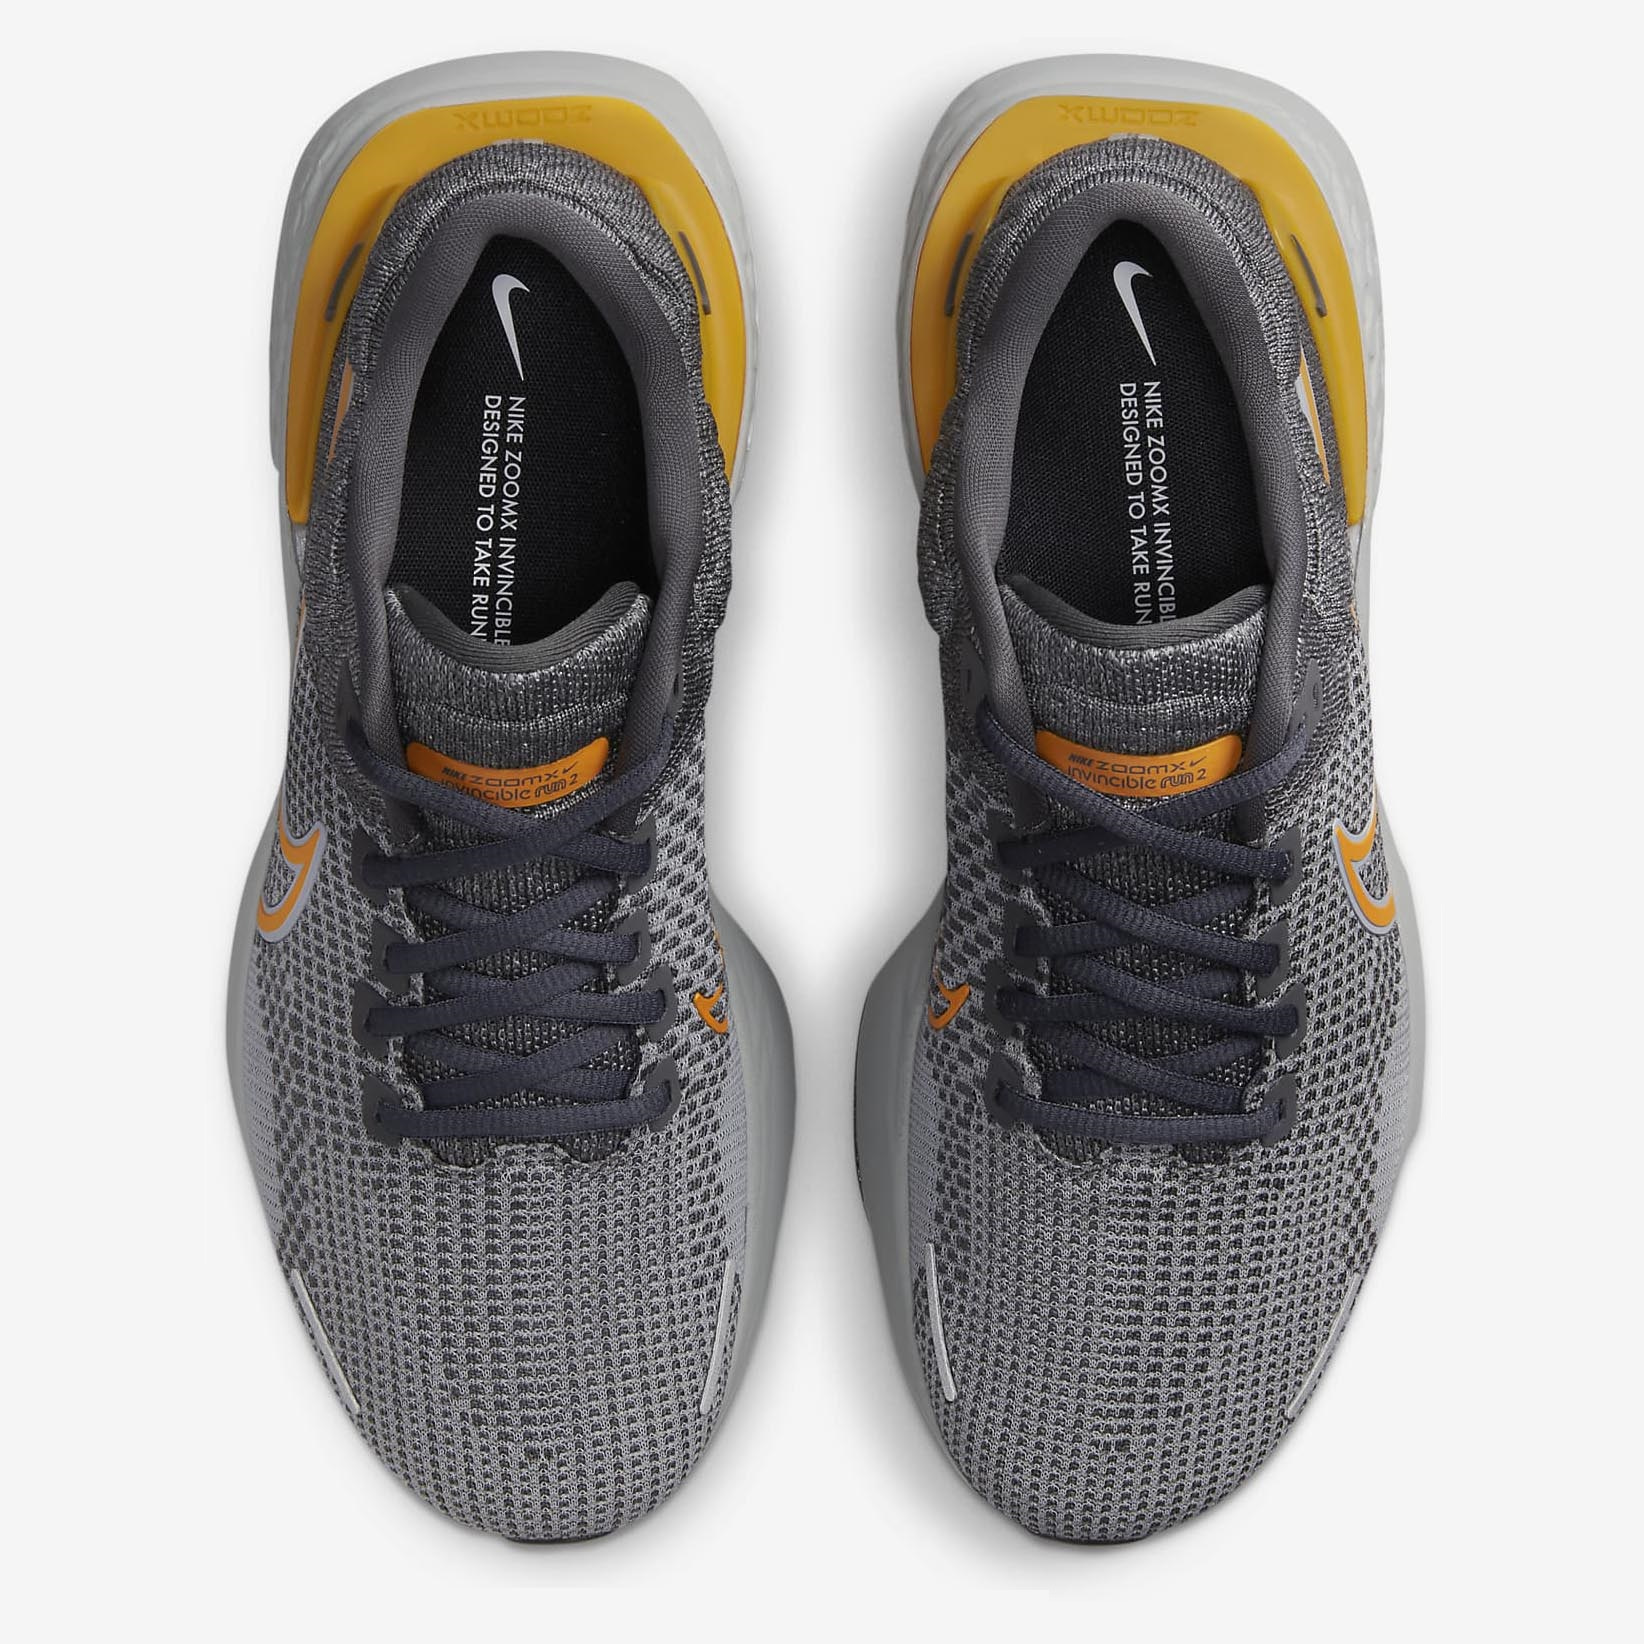 GIÀY THỂ THAO NIKE NAM ZOOMX INVINCIBLE RUN FLYKNIT 2 IRON GREY MARATHON RUNNING SHOES DH5425-002 2